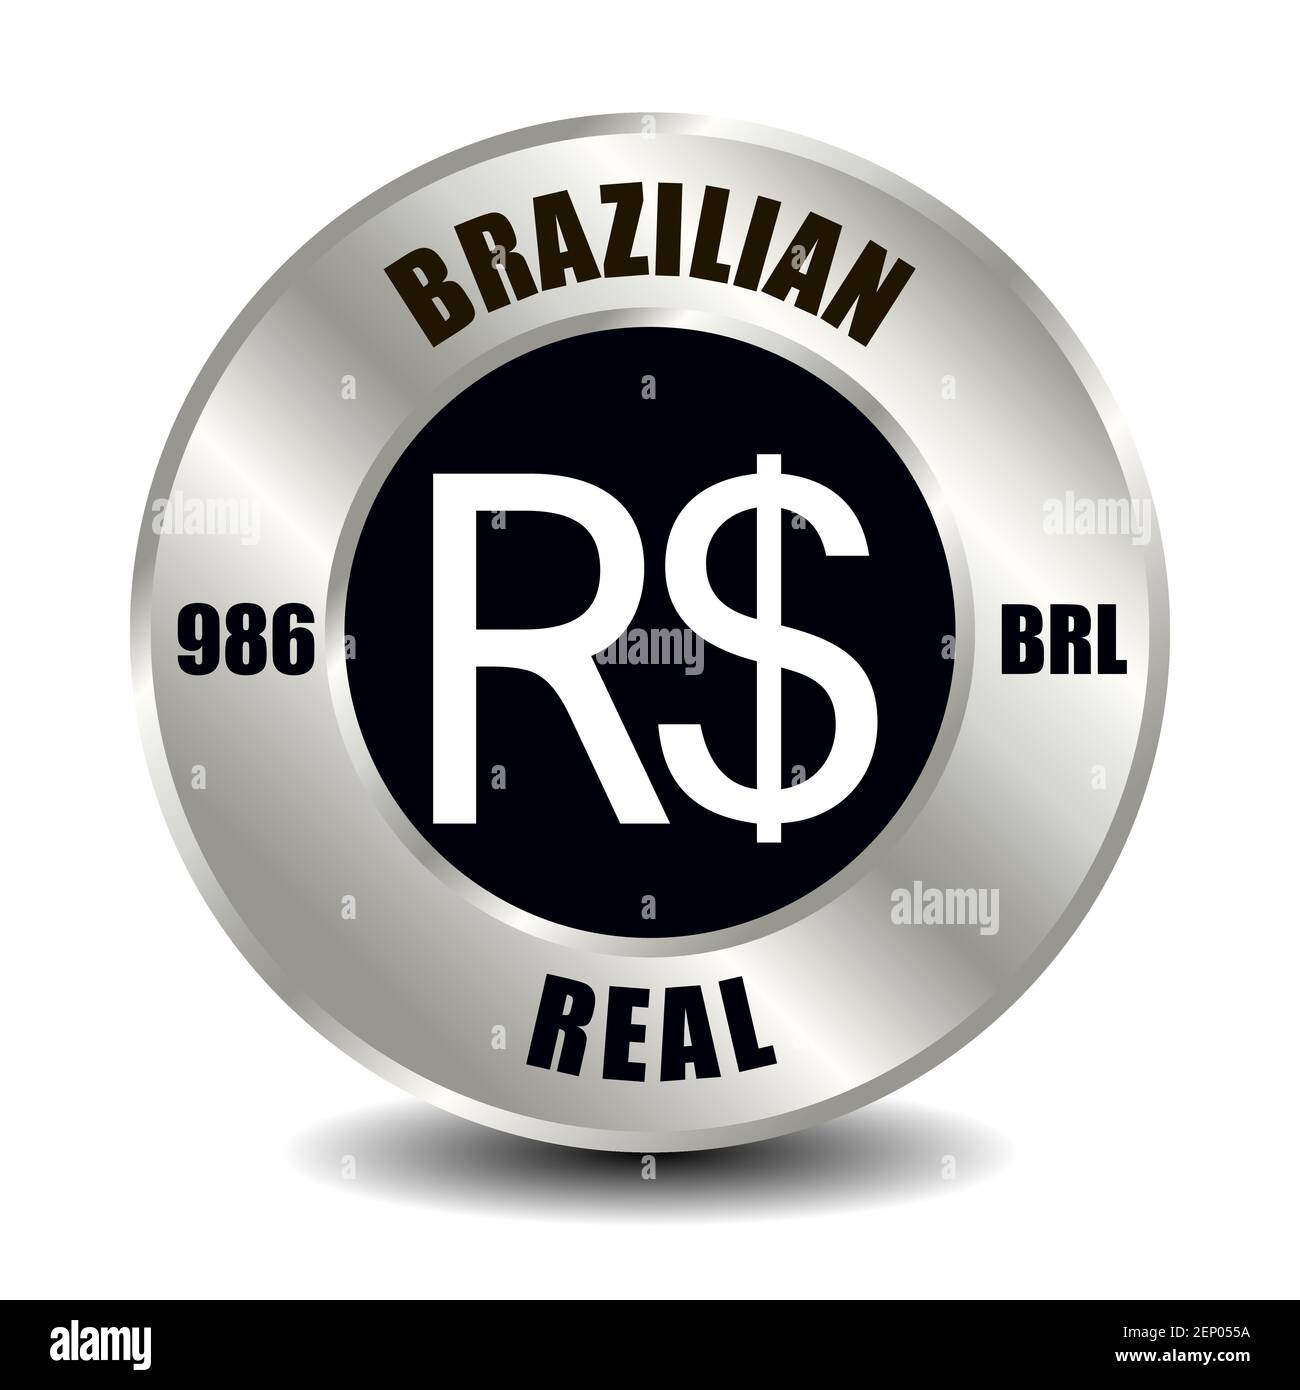 Brazil money icon isolated on round silver coin. Vector sign of currency symbol with international ISO code and abbreviation Stock Vector